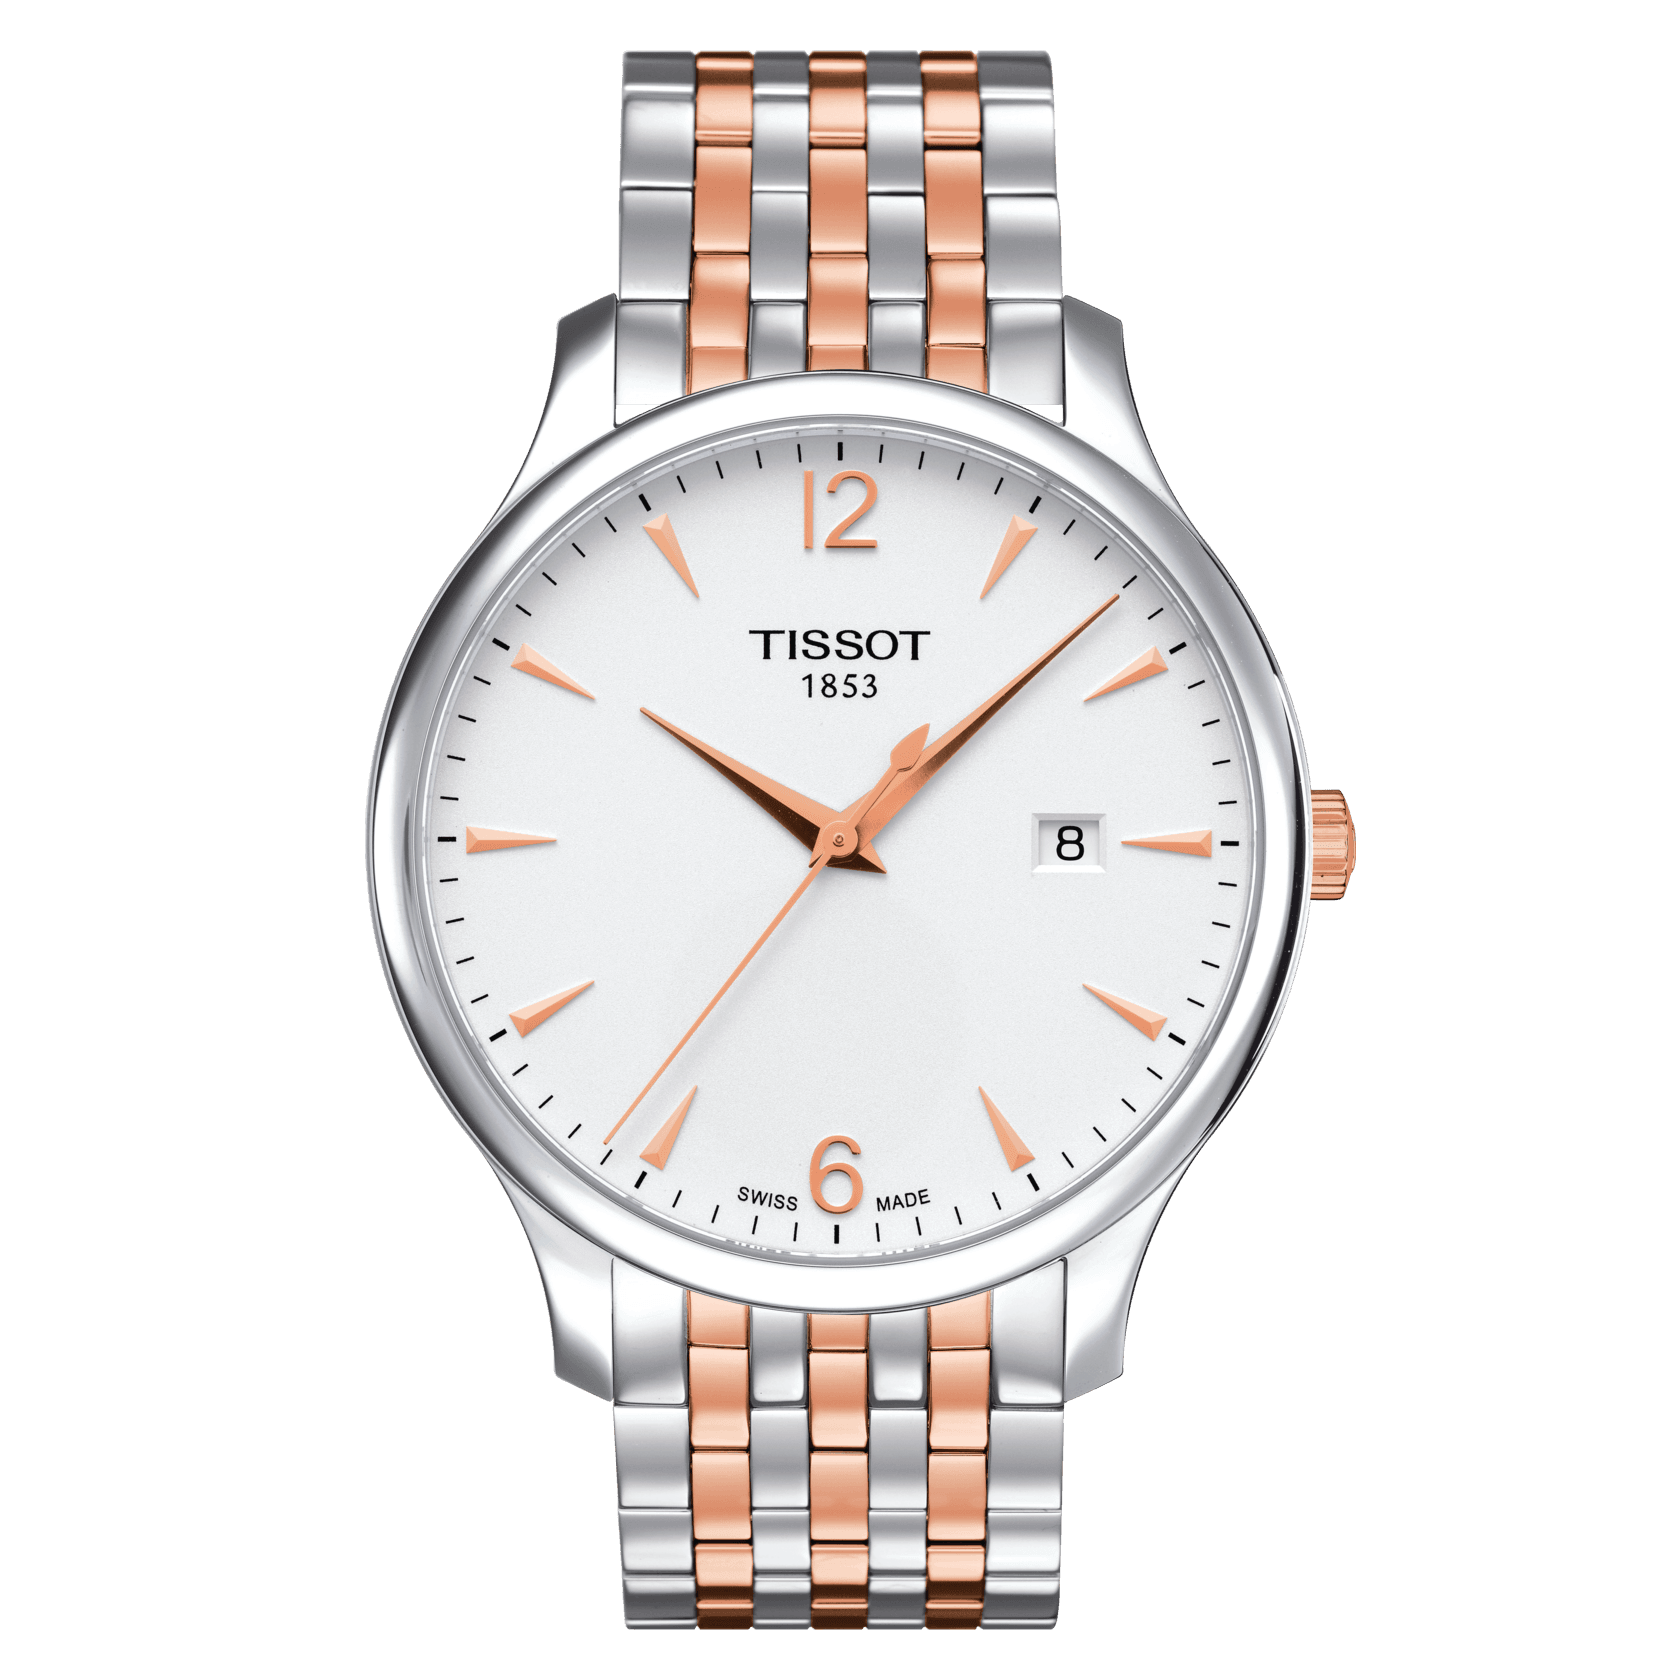 Tissot Tradition Silver Dial Stainless Steel Men's Quartz Watch - Kamal Watch Company